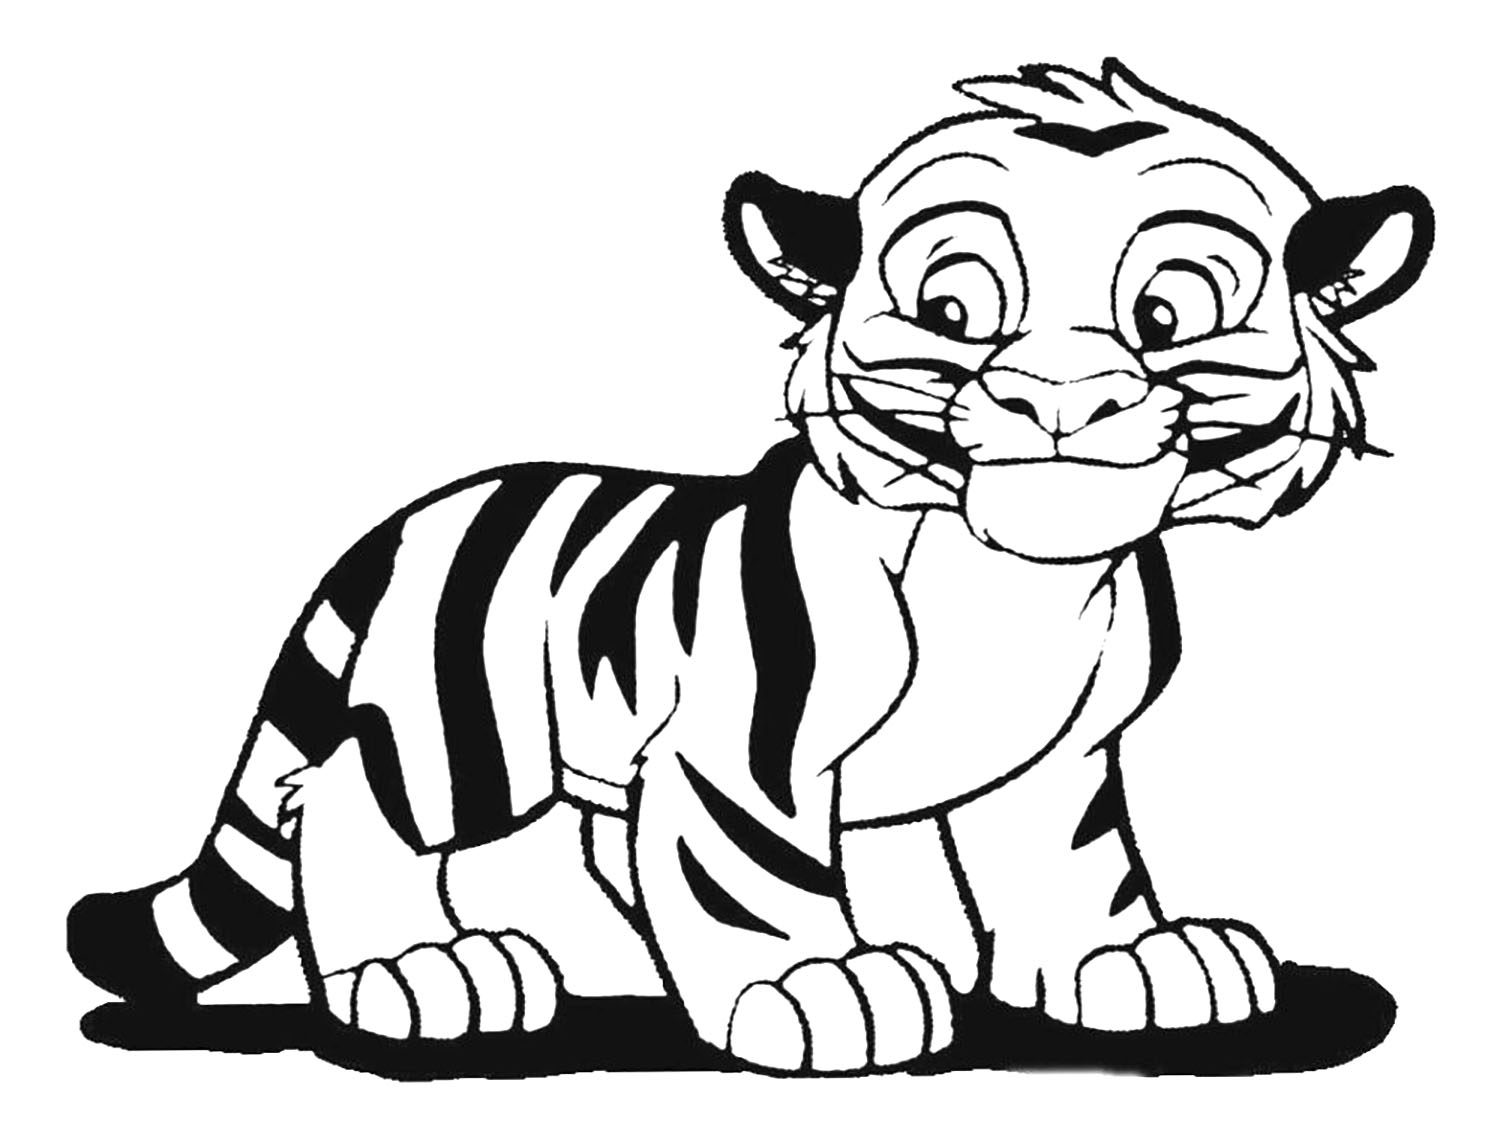 Beautiful Tigers coloring page to print and color